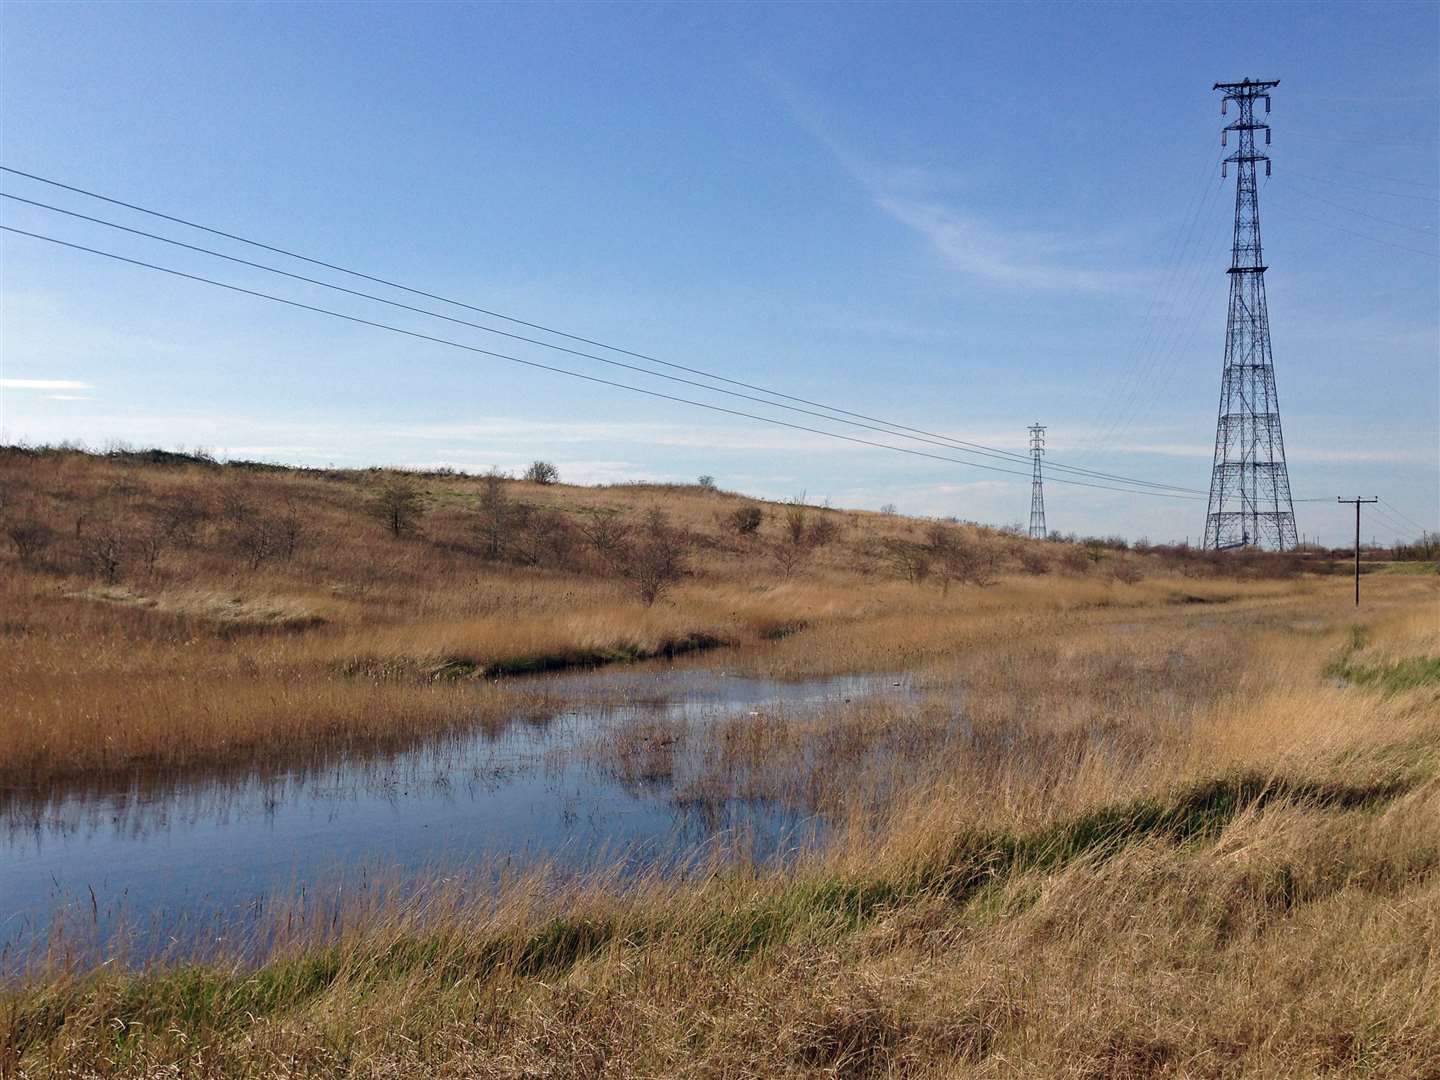 The Swanscombe Marshes were subject to a bid from conservation groups urging to protect the land from development by the London Resort theme park. Picture: Diamond Geezer